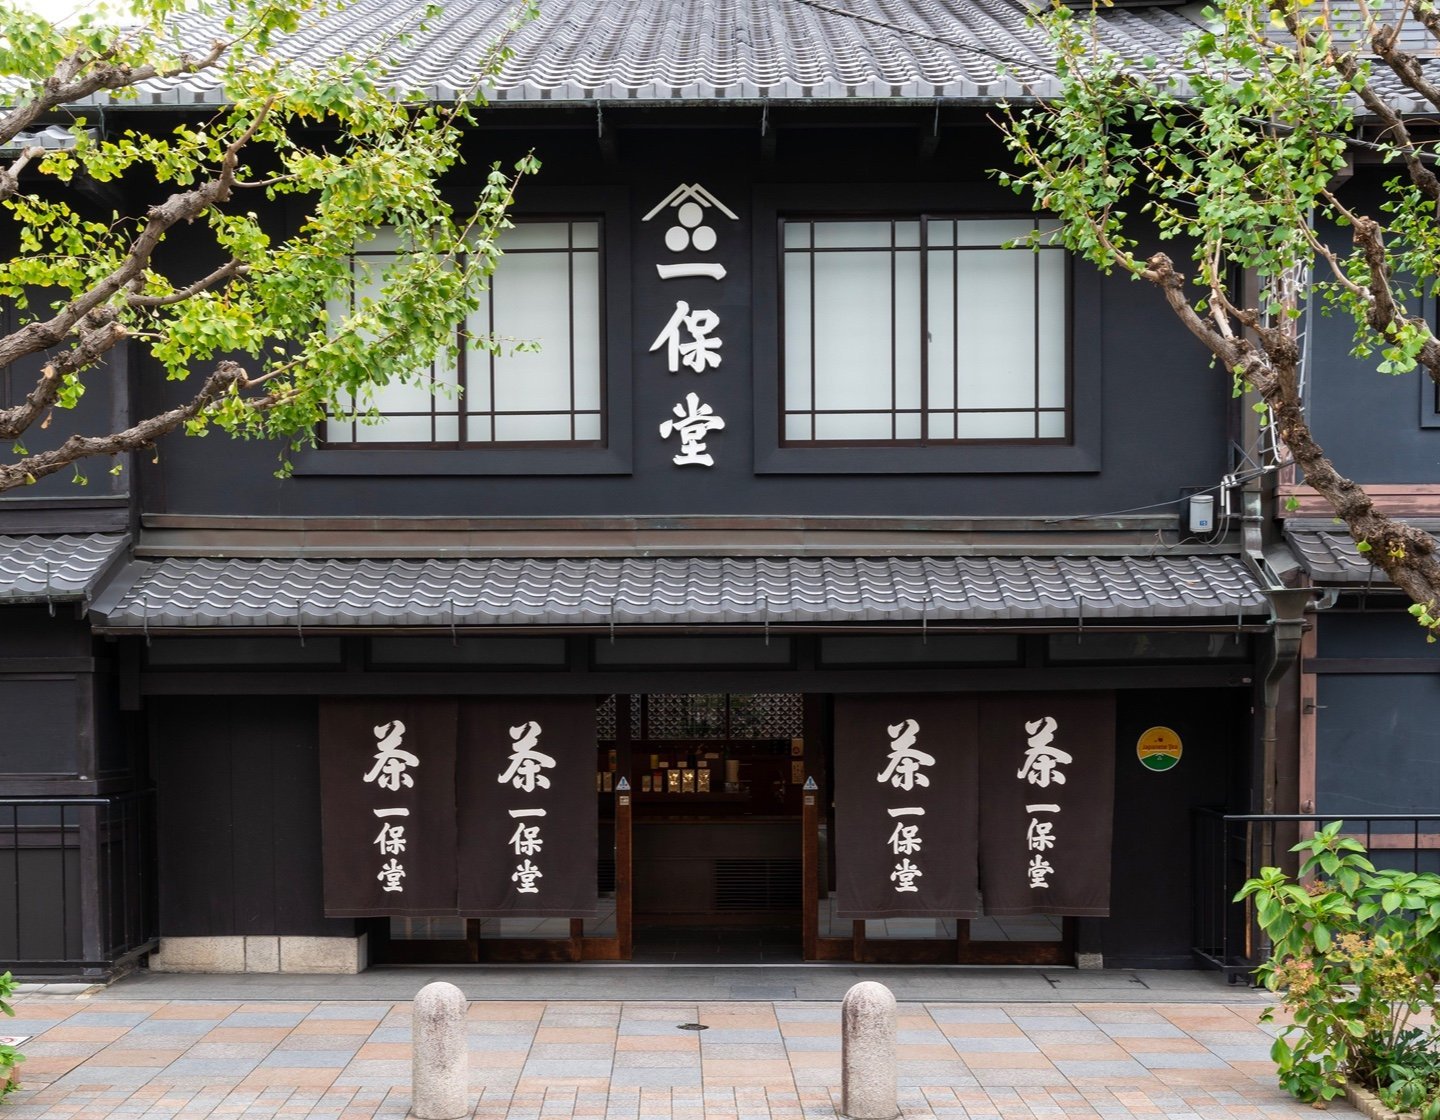 Black storefront of Ippodo Tea's flagship store, tearoom and headquarters in Kyoto, Japan with lush cherry blossom trees